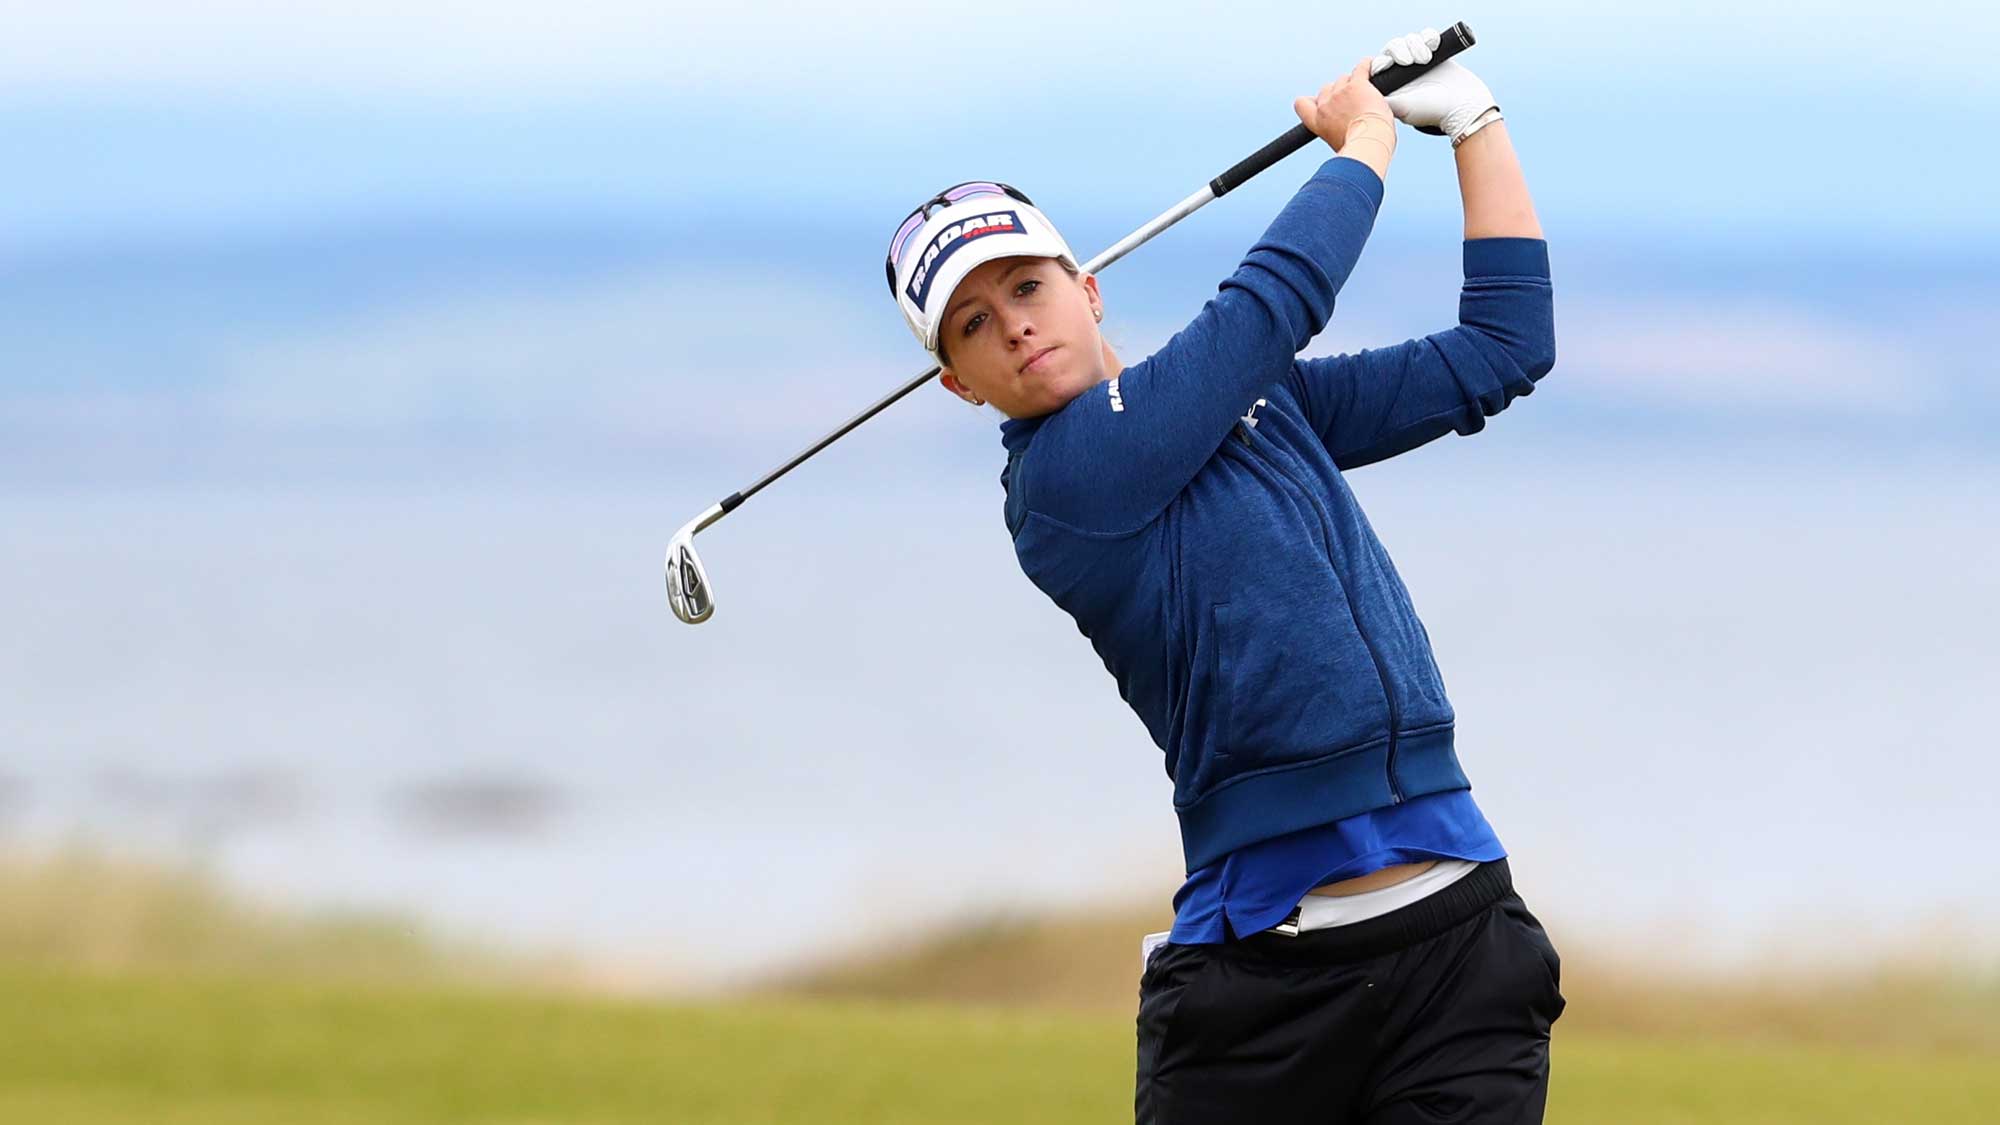 Jodi Ewart Shadoff of England hits her second shot on the 4th hole during the second round of the Ricoh Women's British Open at Kingsbarns Golf Links